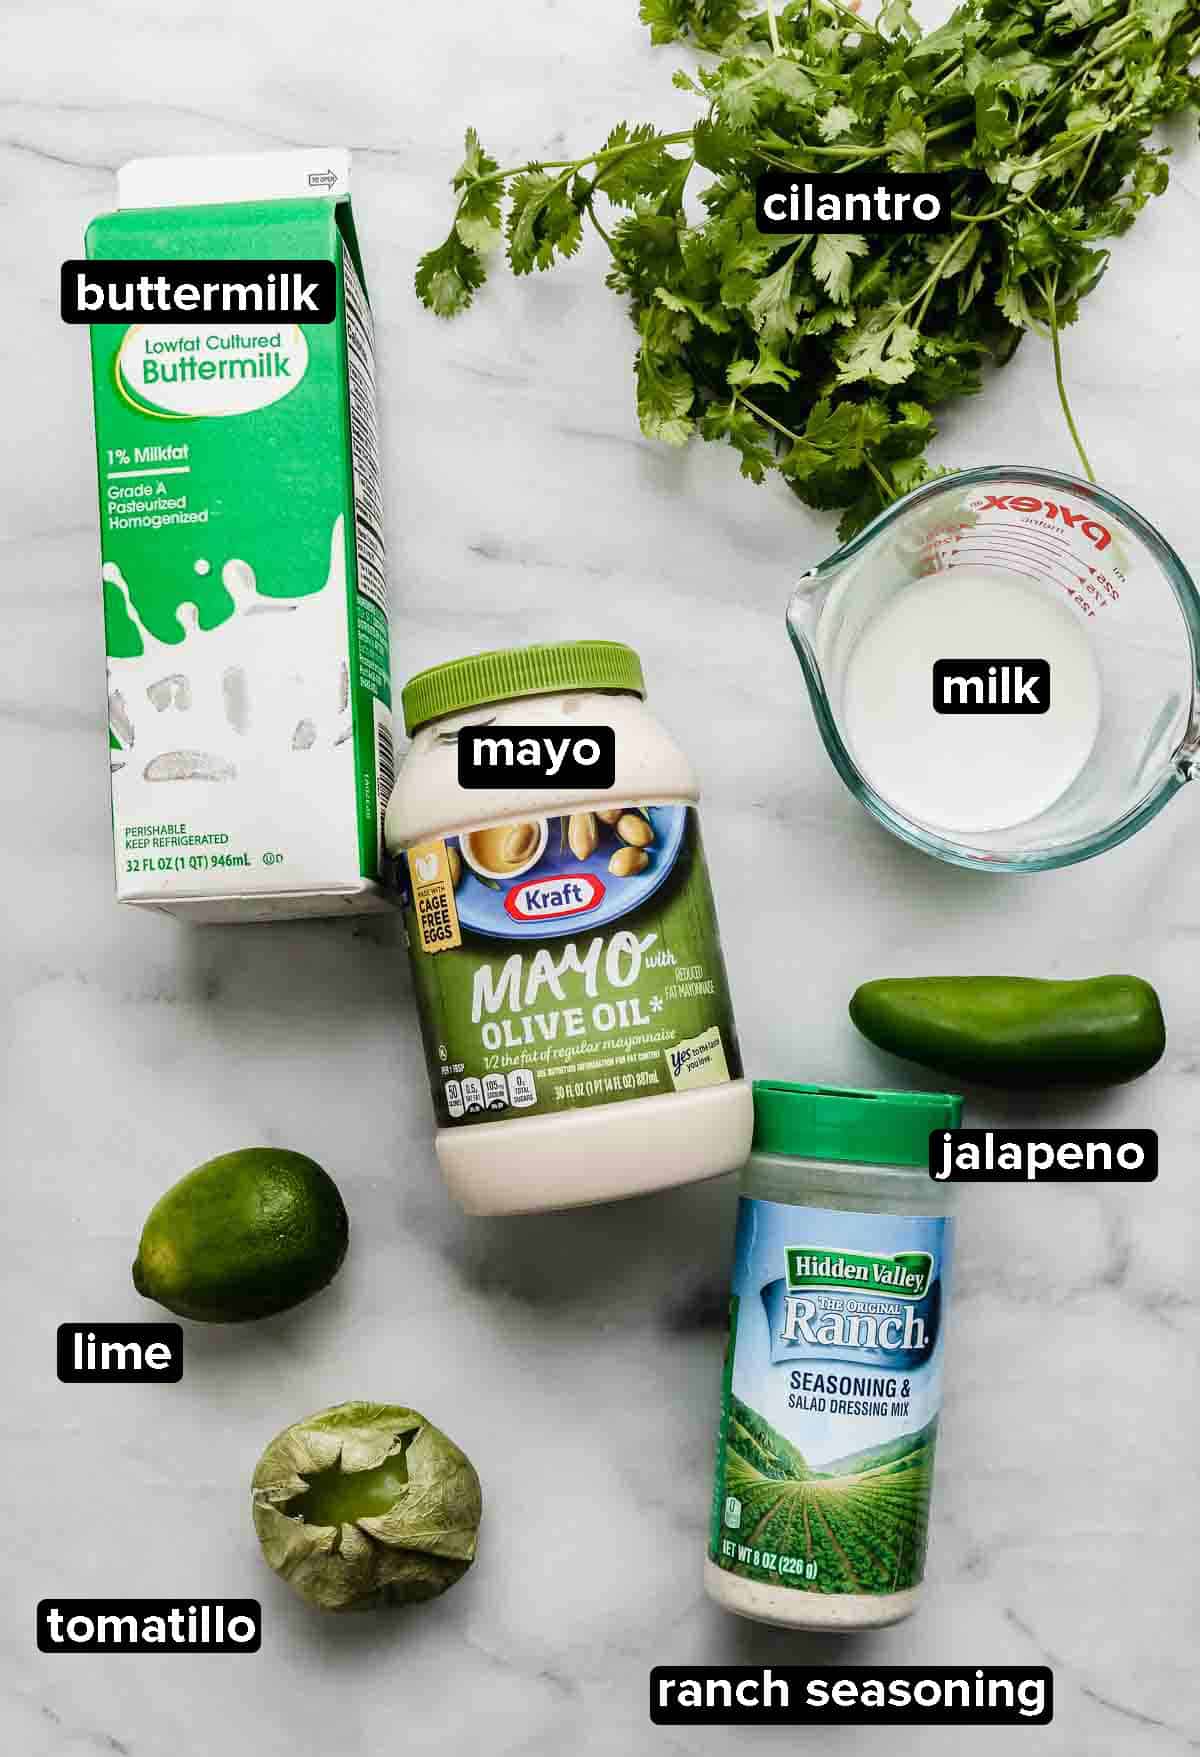 Cilantro Lime dressing ingredients on a white background; ingredients include a tomatillo, jalapeño, buttermilk, cilantro, mayo, ranch seasoning and a lime.